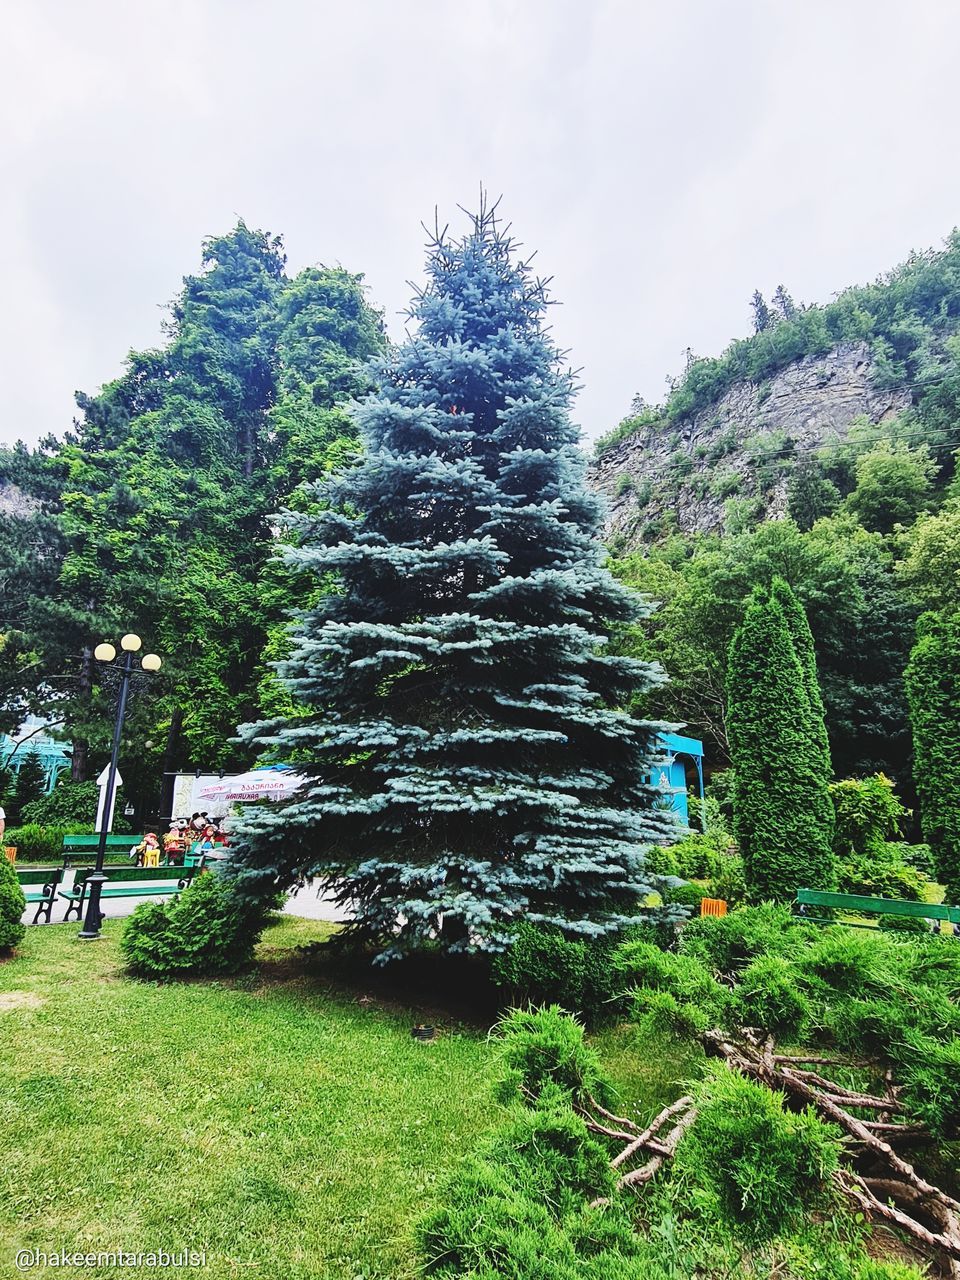 plant, tree, nature, green, sky, growth, coniferous tree, beauty in nature, pinaceae, pine tree, land, day, environment, grass, tranquility, flower, no people, cloud, spruce, scenics - nature, outdoors, fir, forest, garden, landscape, tranquil scene, non-urban scene, pine woodland, christmas tree, foliage